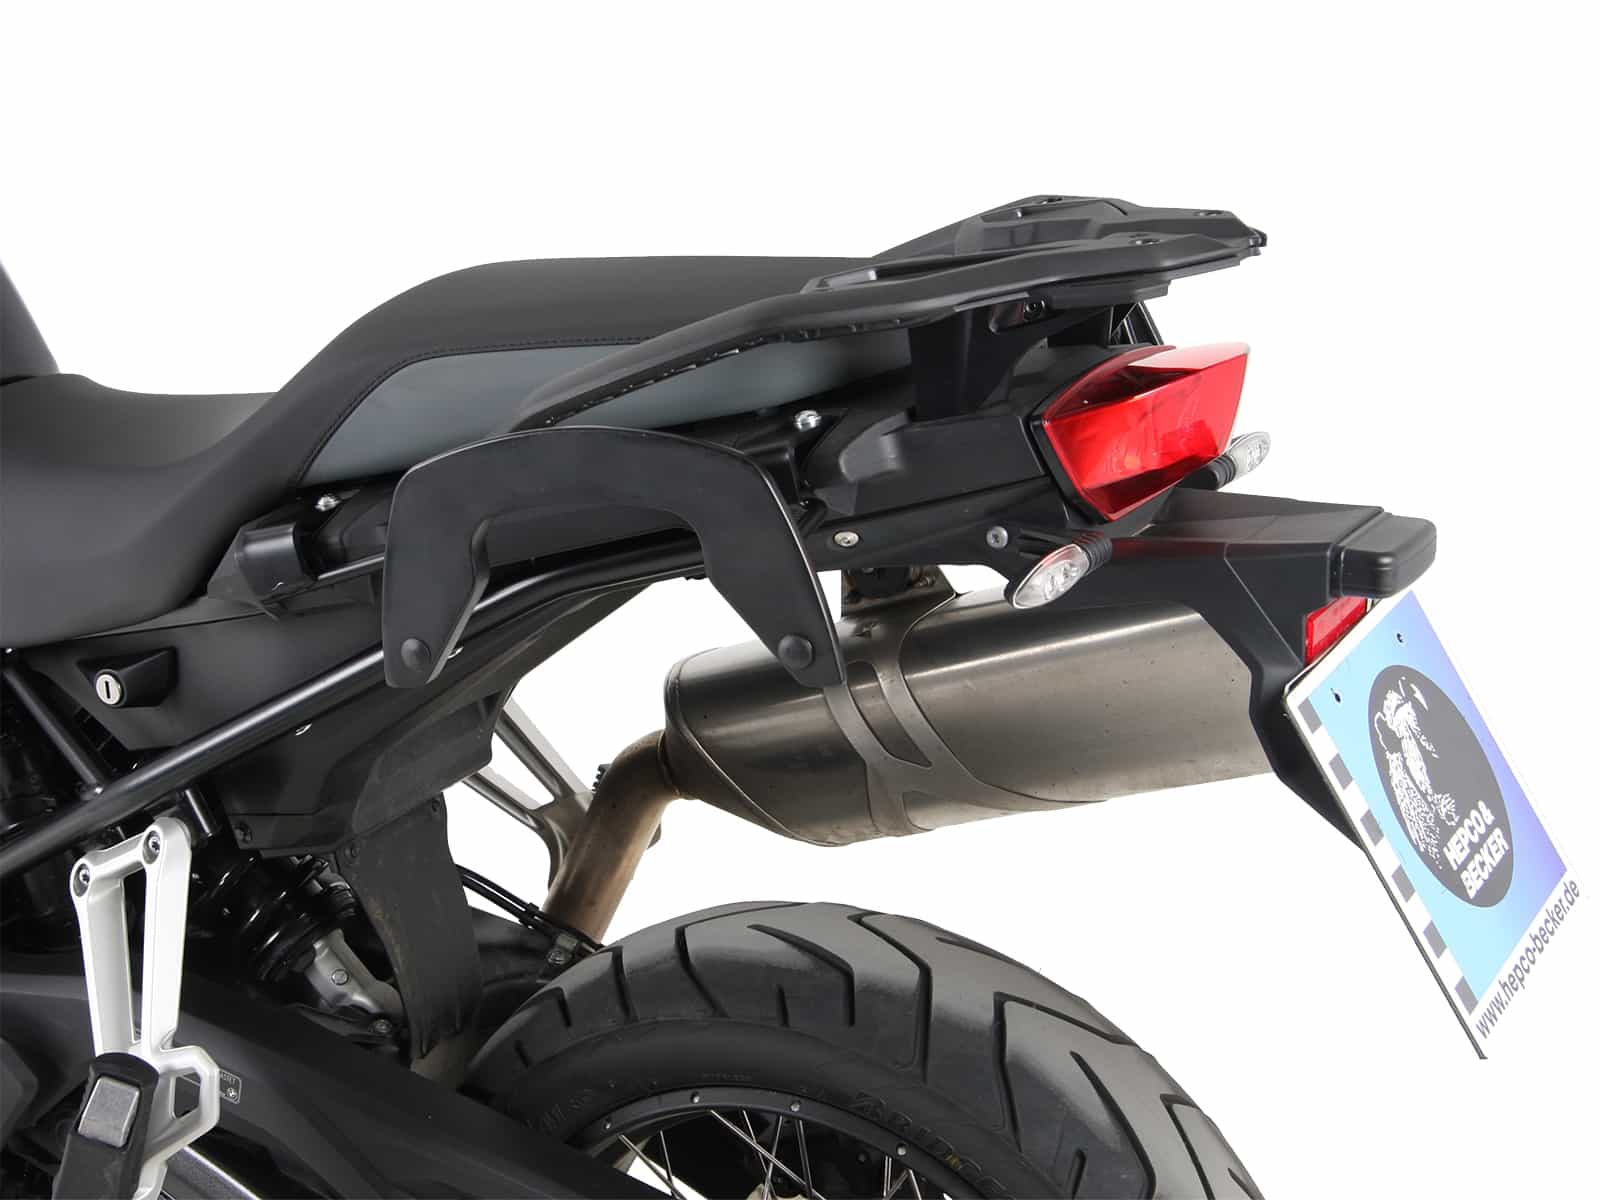 C-Bow sidecarrier for BMW F 850 GS Adventure (2019-)